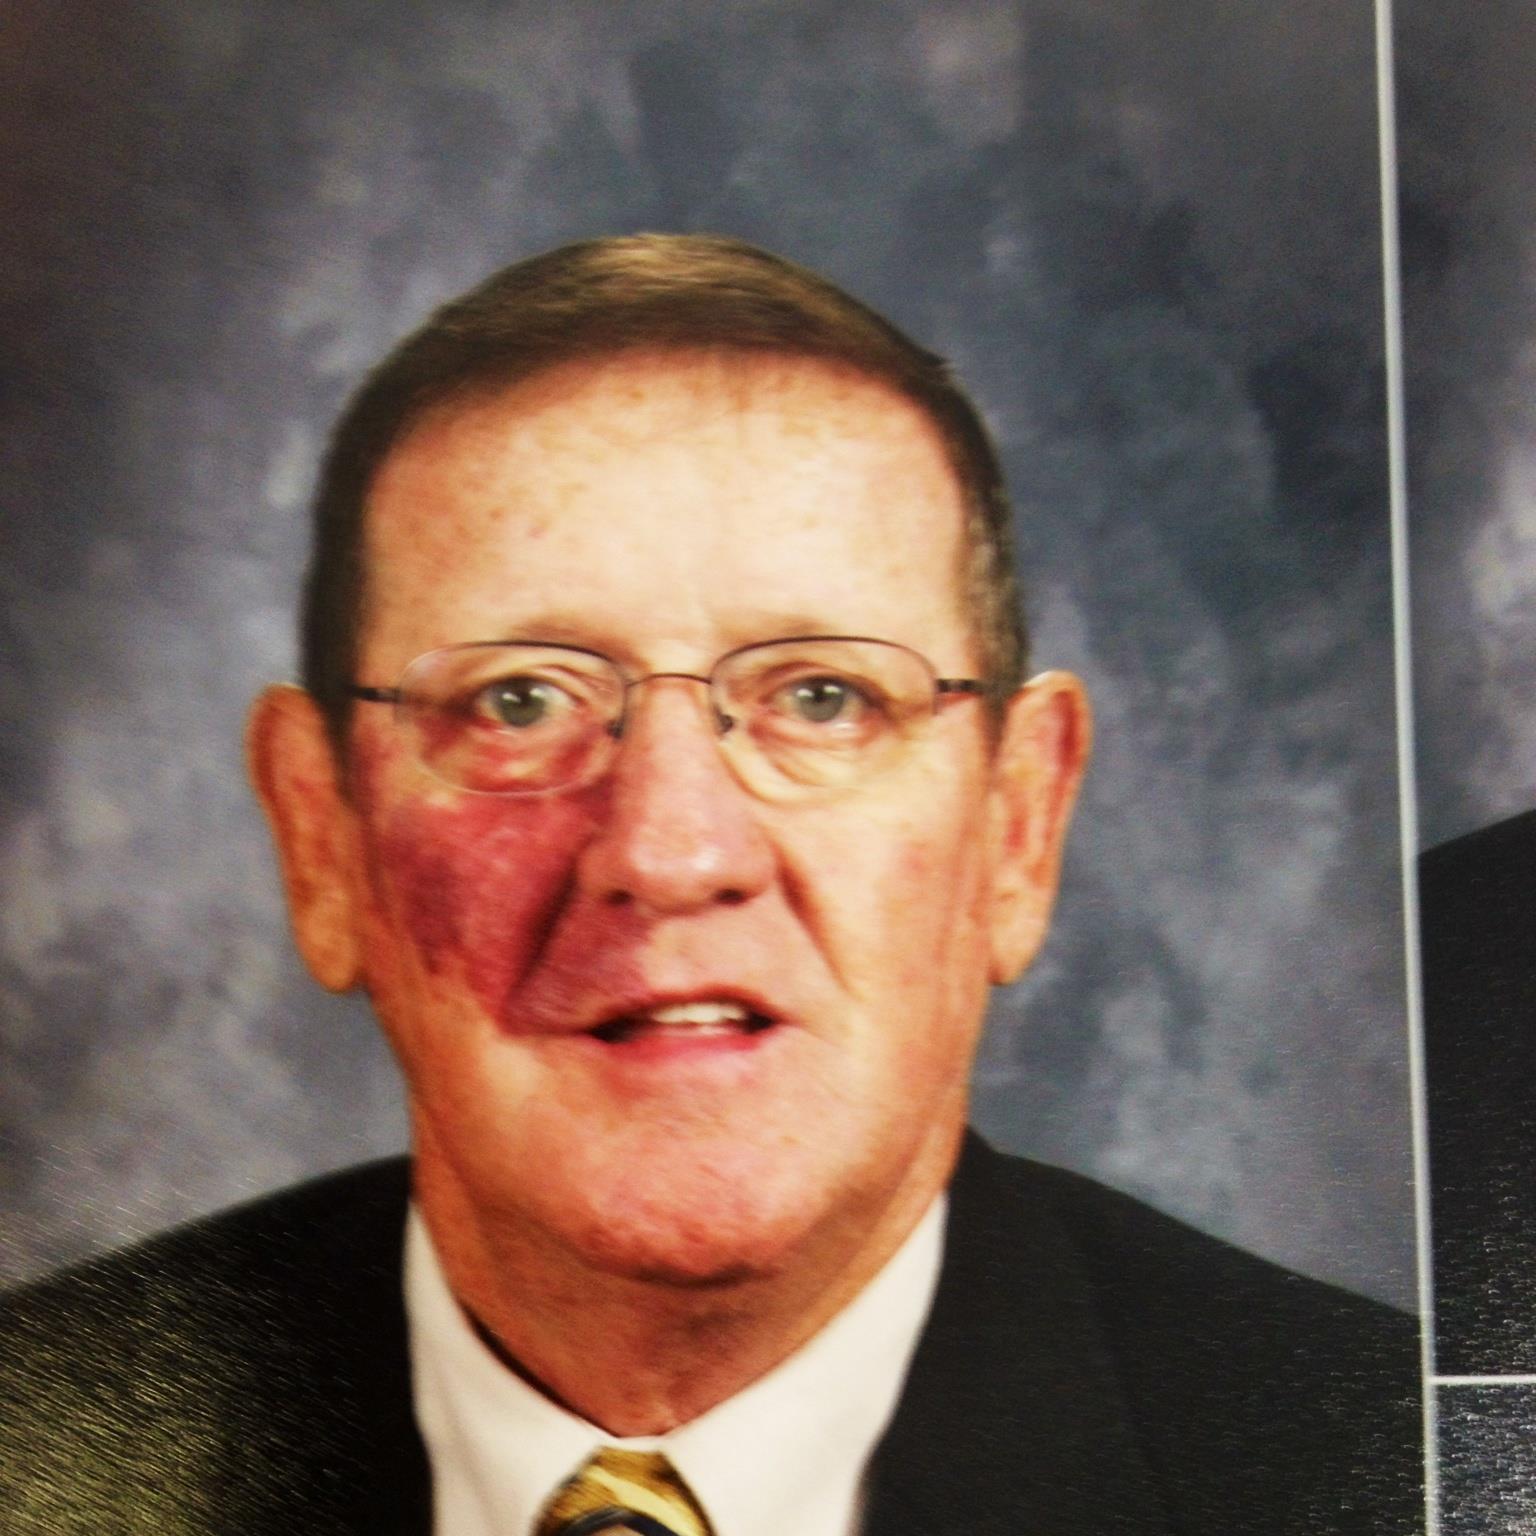 Retired Superintendent, working part time at USD #430 as the high school Activities Director.